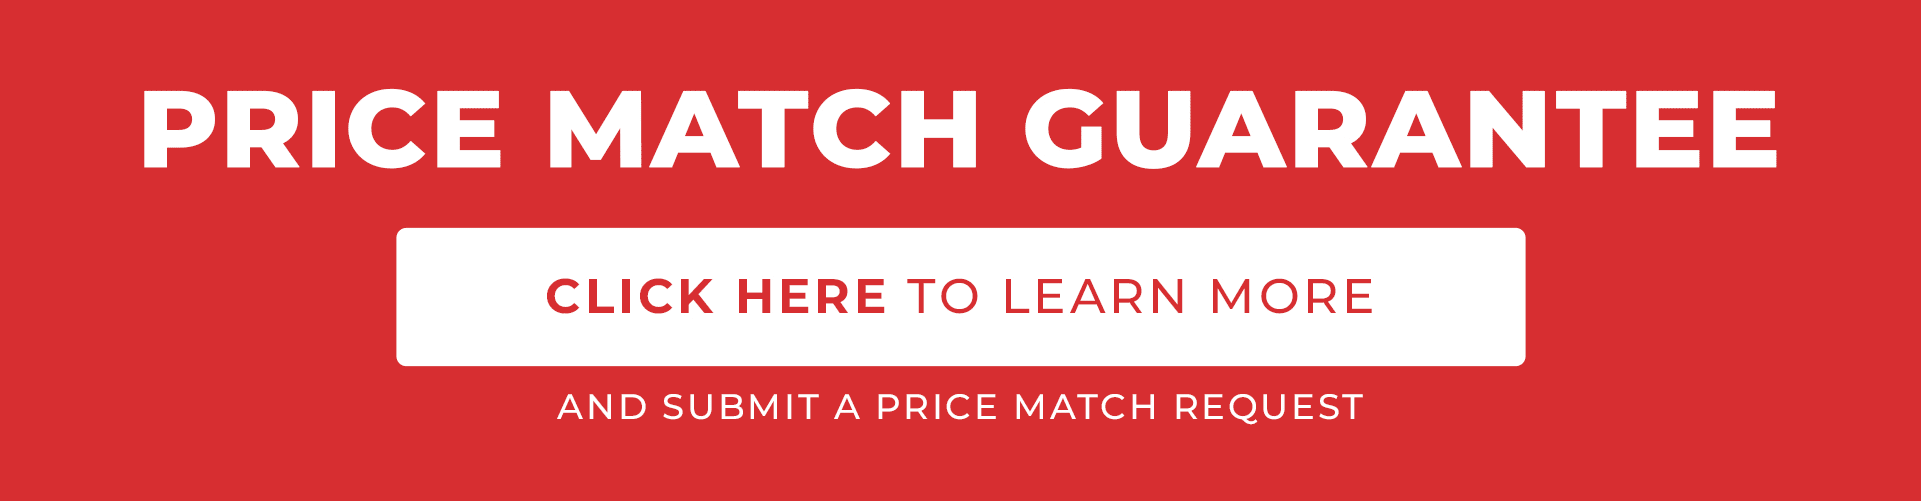 Price Match Guarantee - Click to Learn More